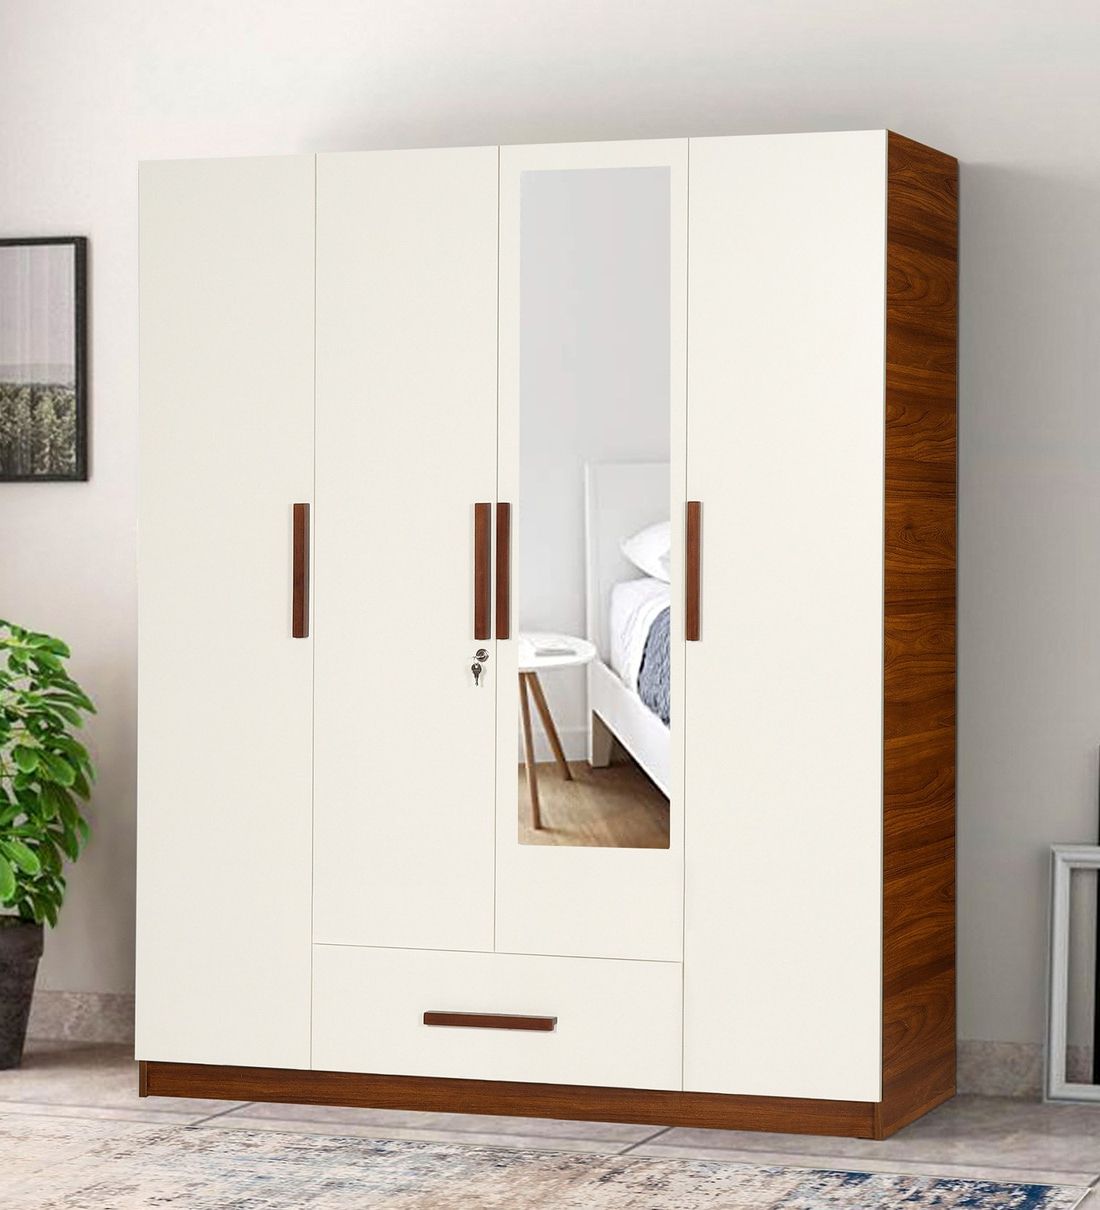 Buy Ozone 4 Door Wardrobe In White Finish With Mirror At 47% Offtrevi  Furniture | Pepperfry For 4 Door Wardrobes With Mirror And Drawers (View 10 of 20)